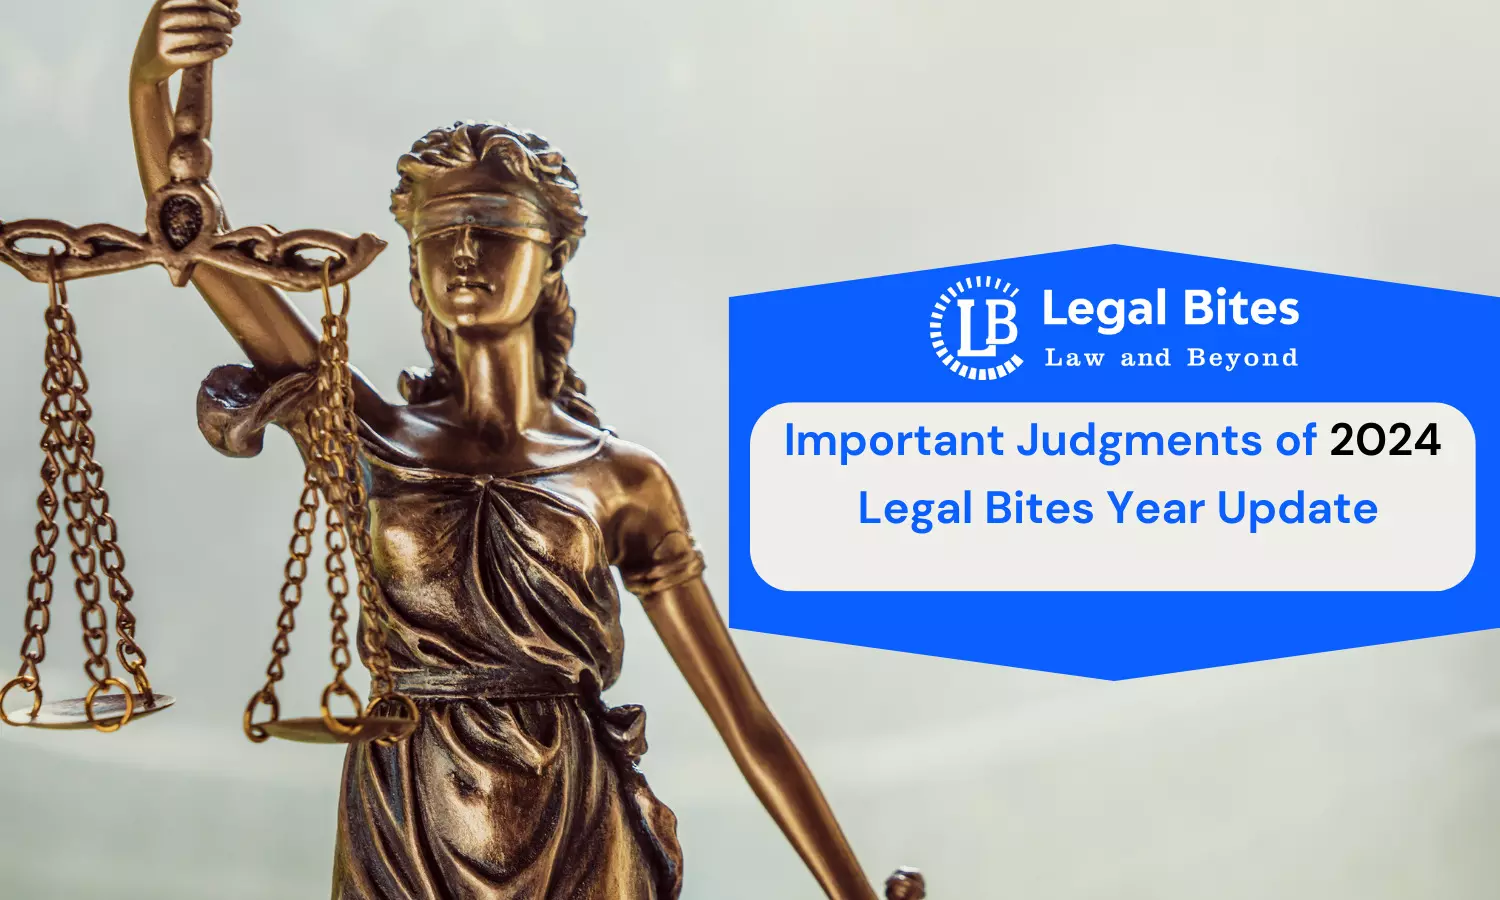 Important Judgments of 2024: Legal Bites Year Update